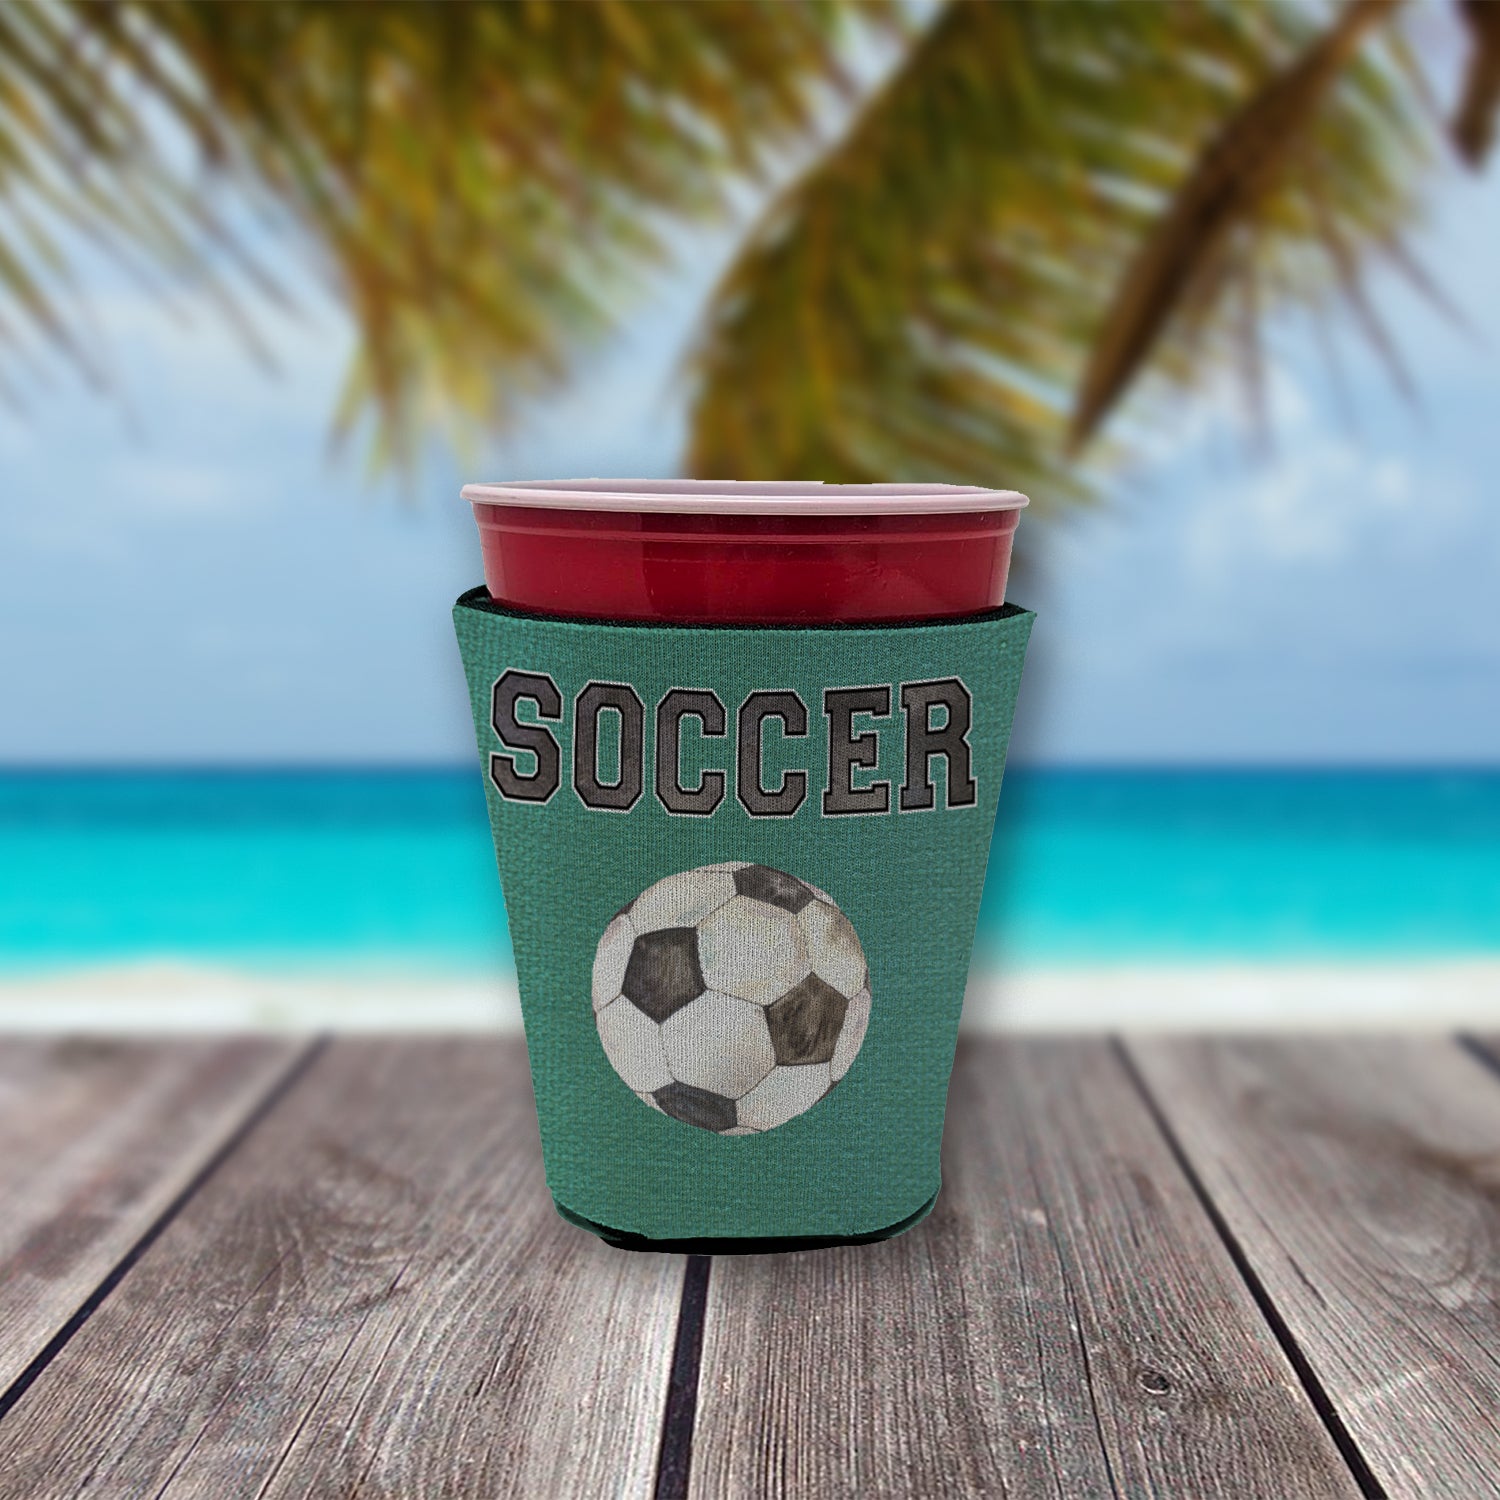 Soccer Red Cup Beverage Insulator Hugger  the-store.com.